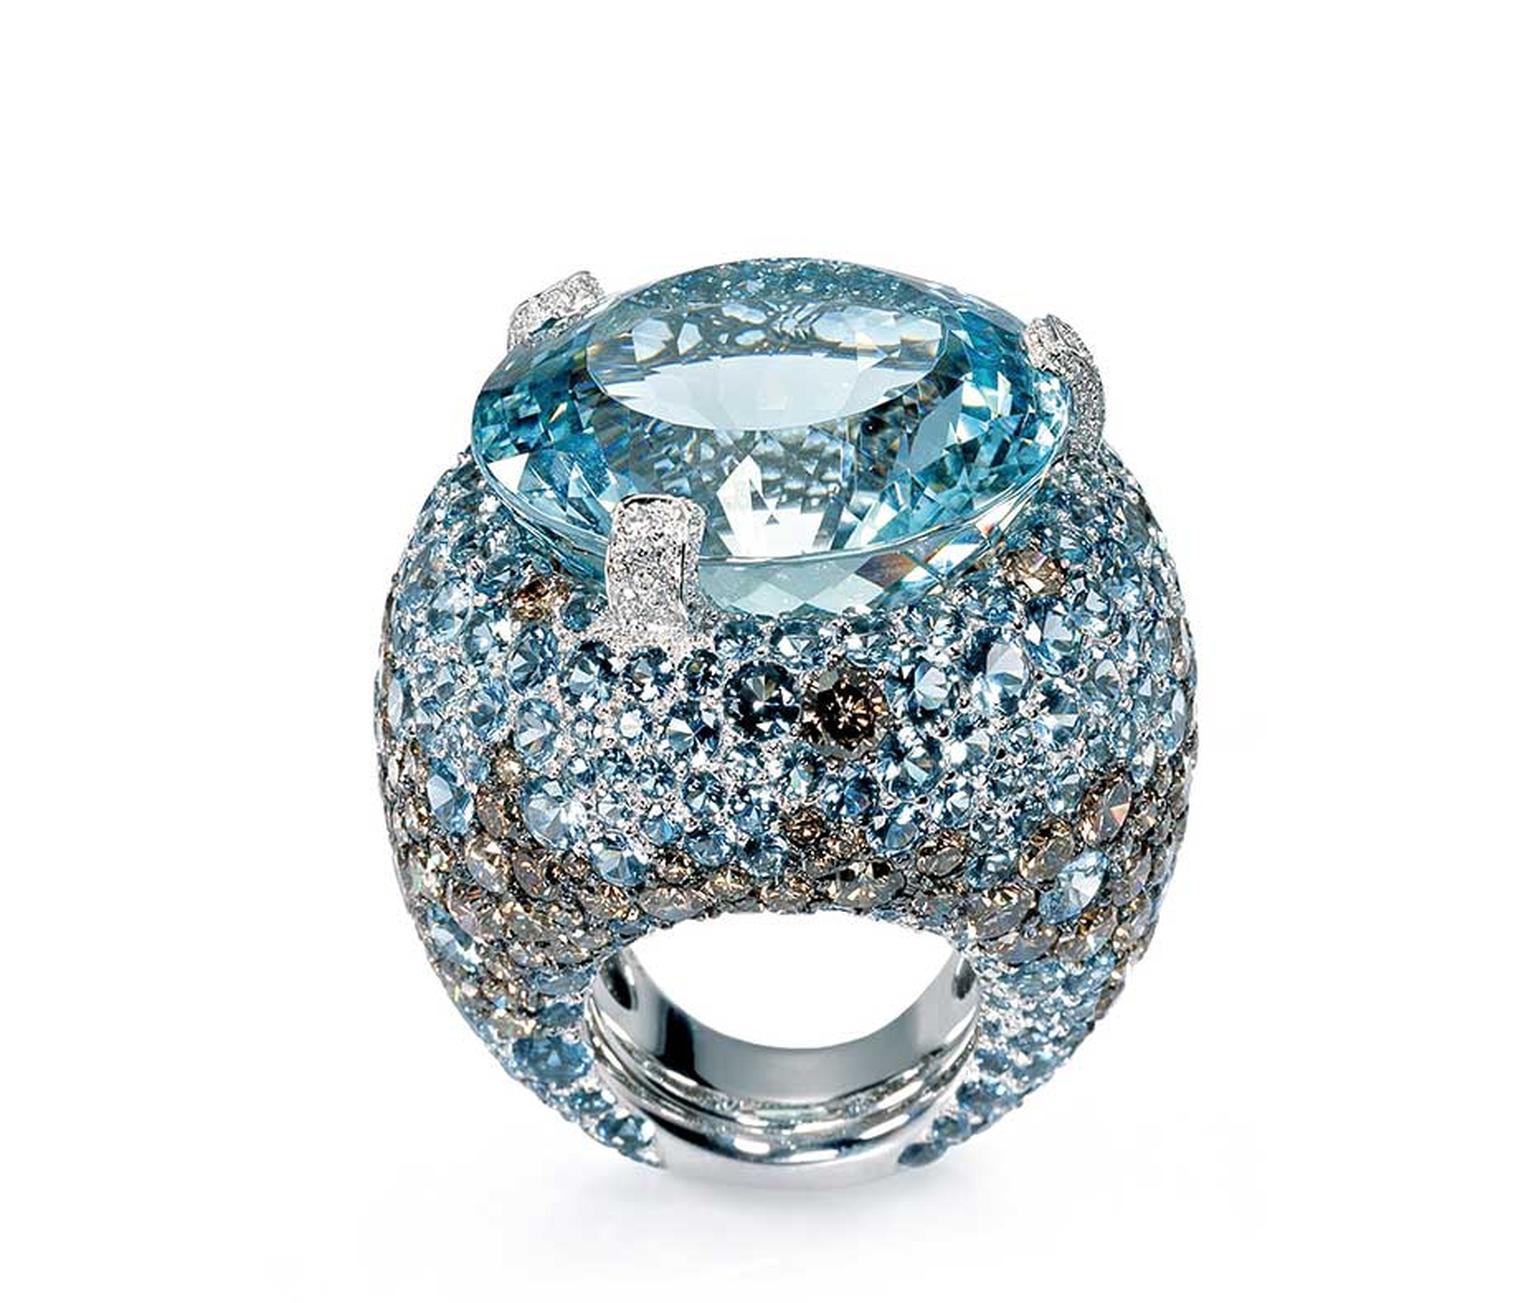 de GRISOGONO Melody of Colours collection aquamarine ring with diamonds.